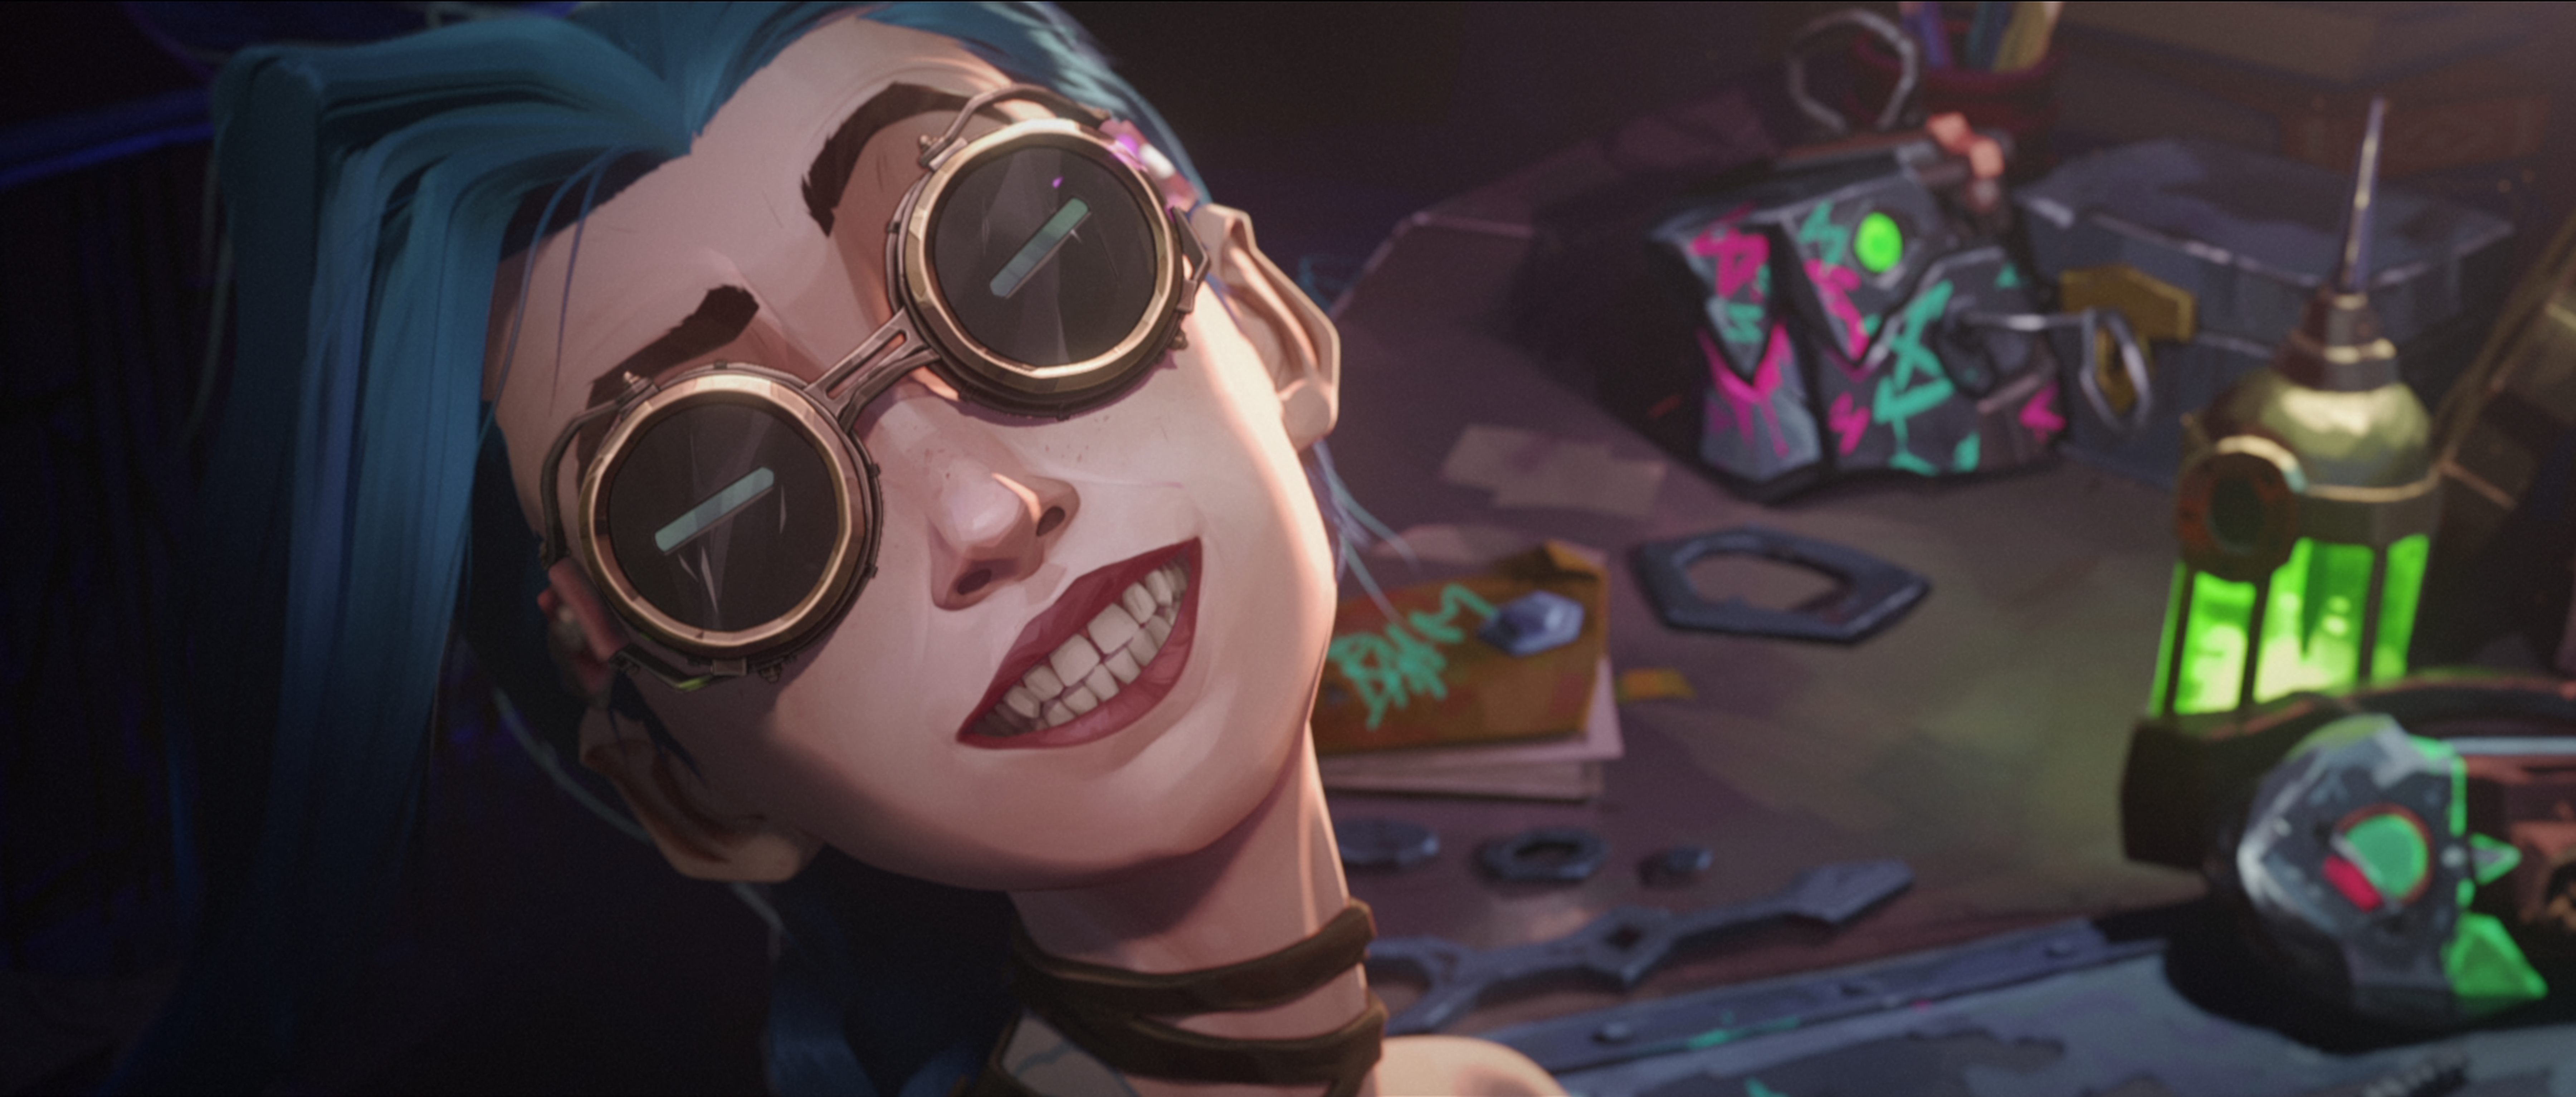 Jinx smiling with goggles on in a still from season 1 of Arcane